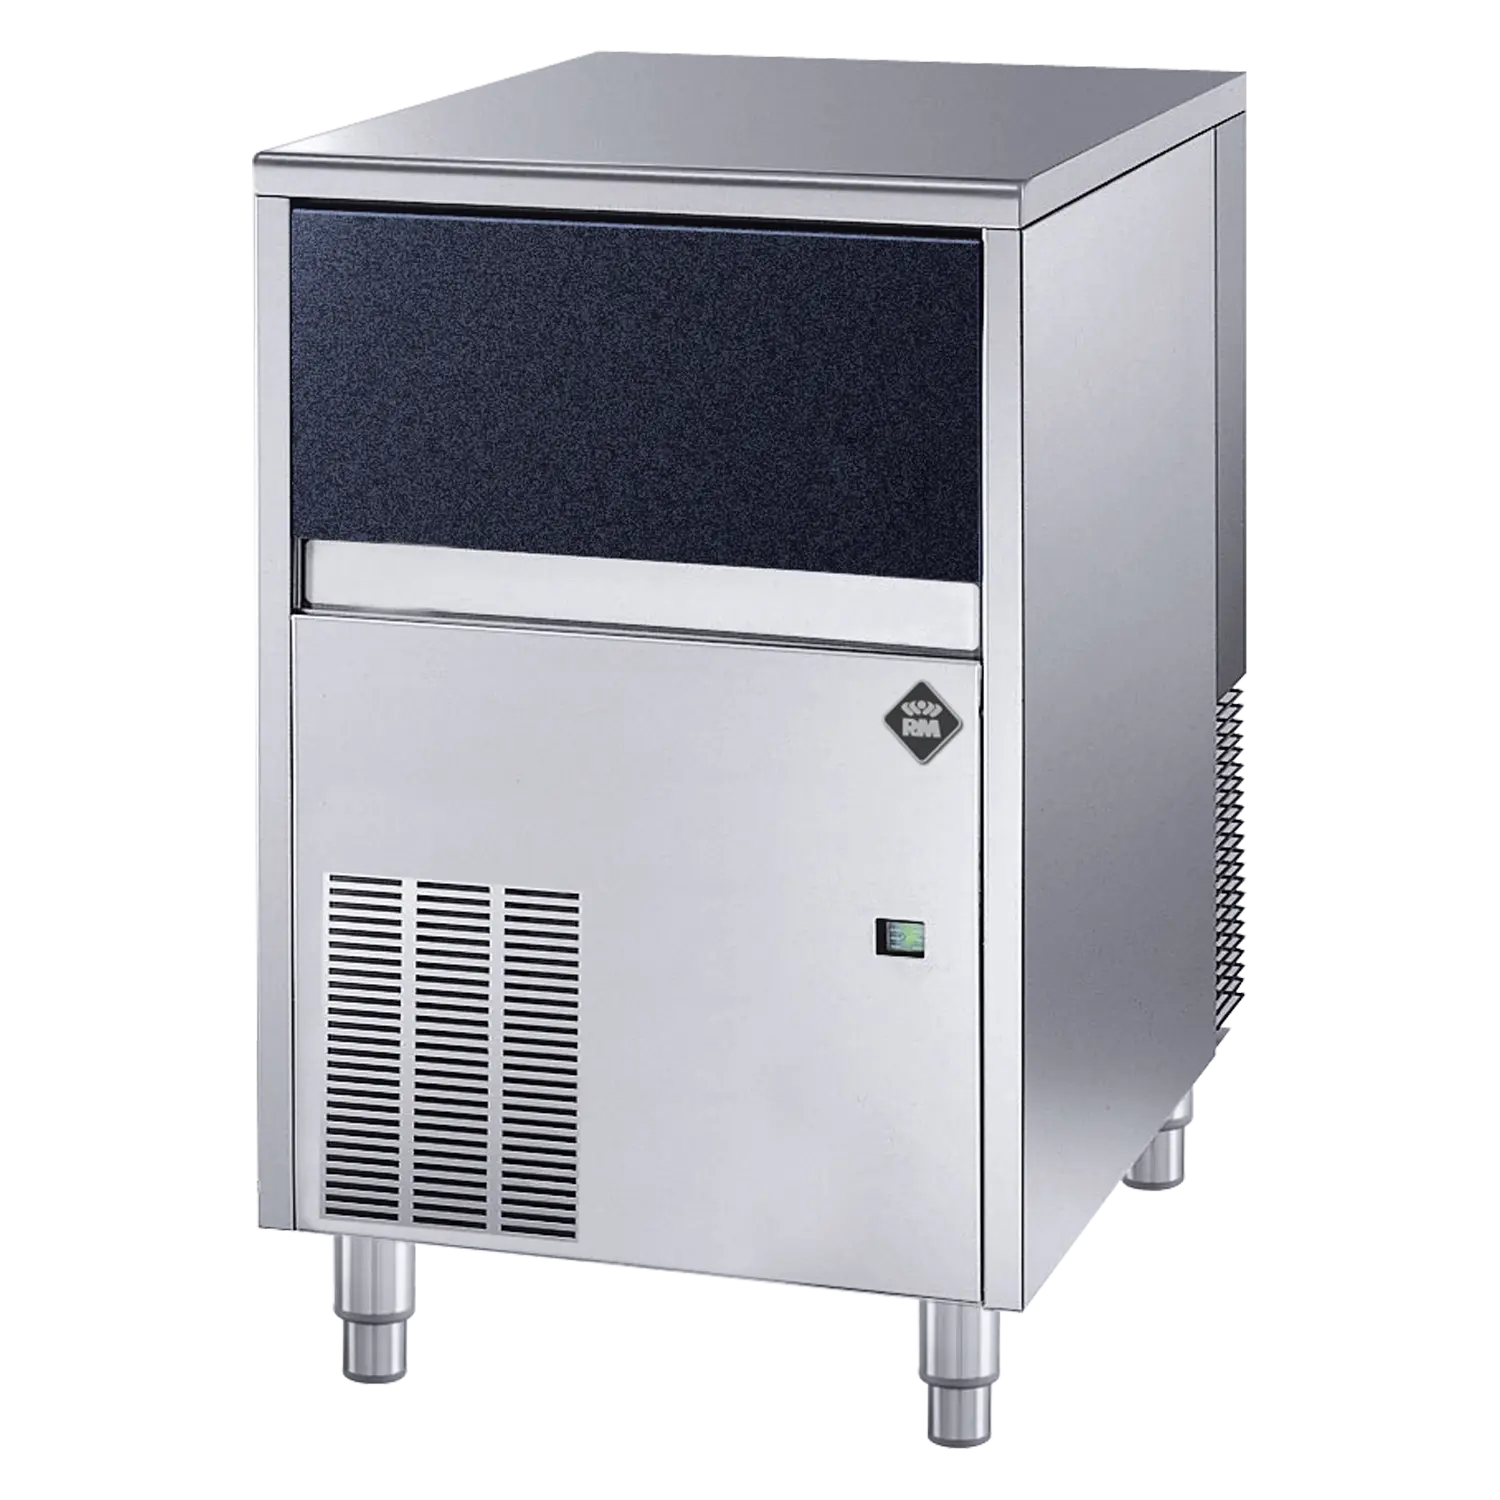 Ice maker air cooling granular ice 90 kg / 24 h | RM - IMG 9030 A